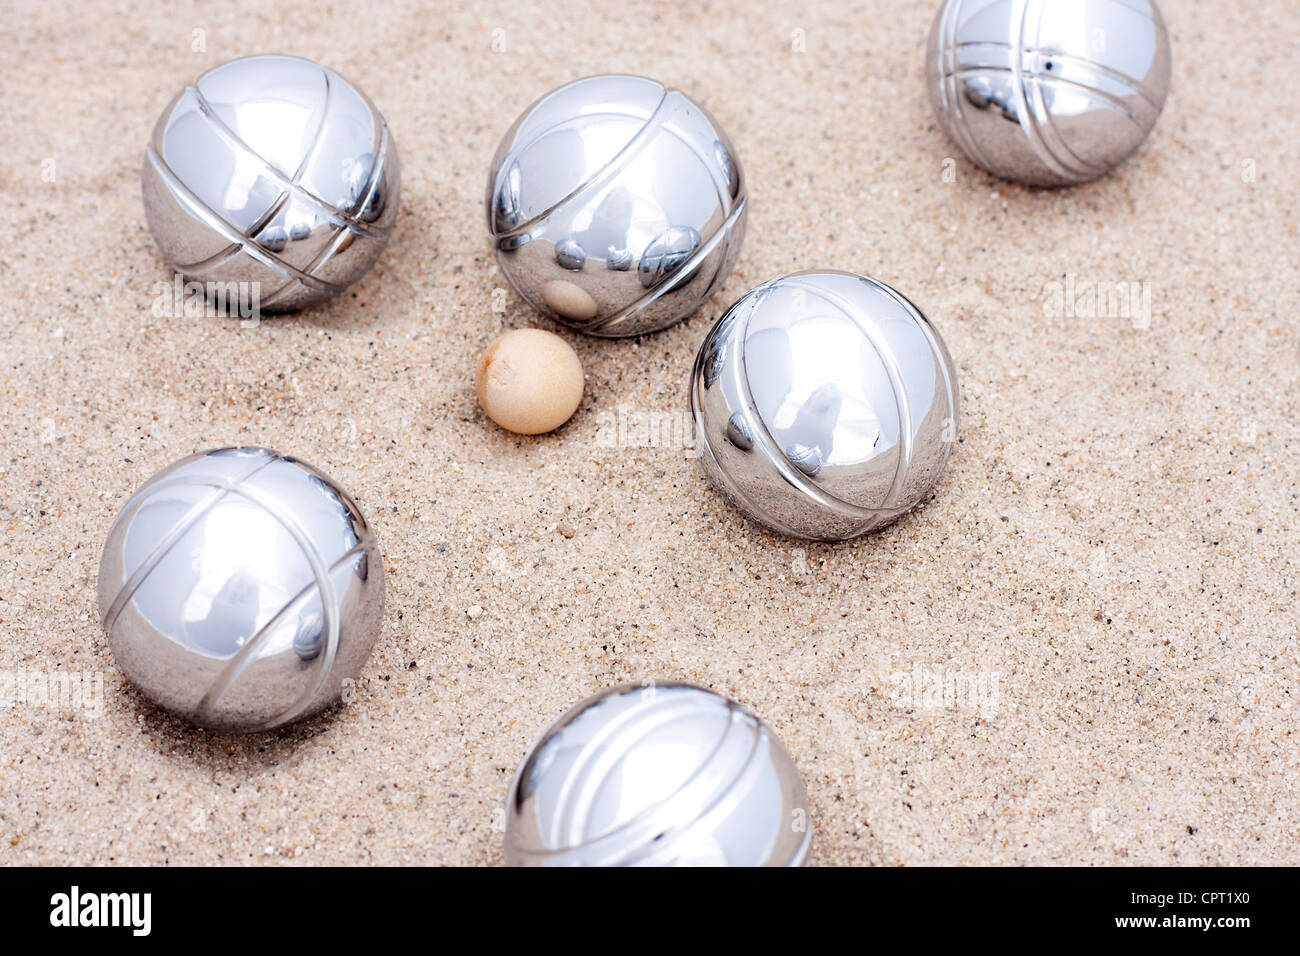 game-of-jeu-de-boule-silver-metal-balls-in-sand-a-french-ball-game-CPT1X0.jpg